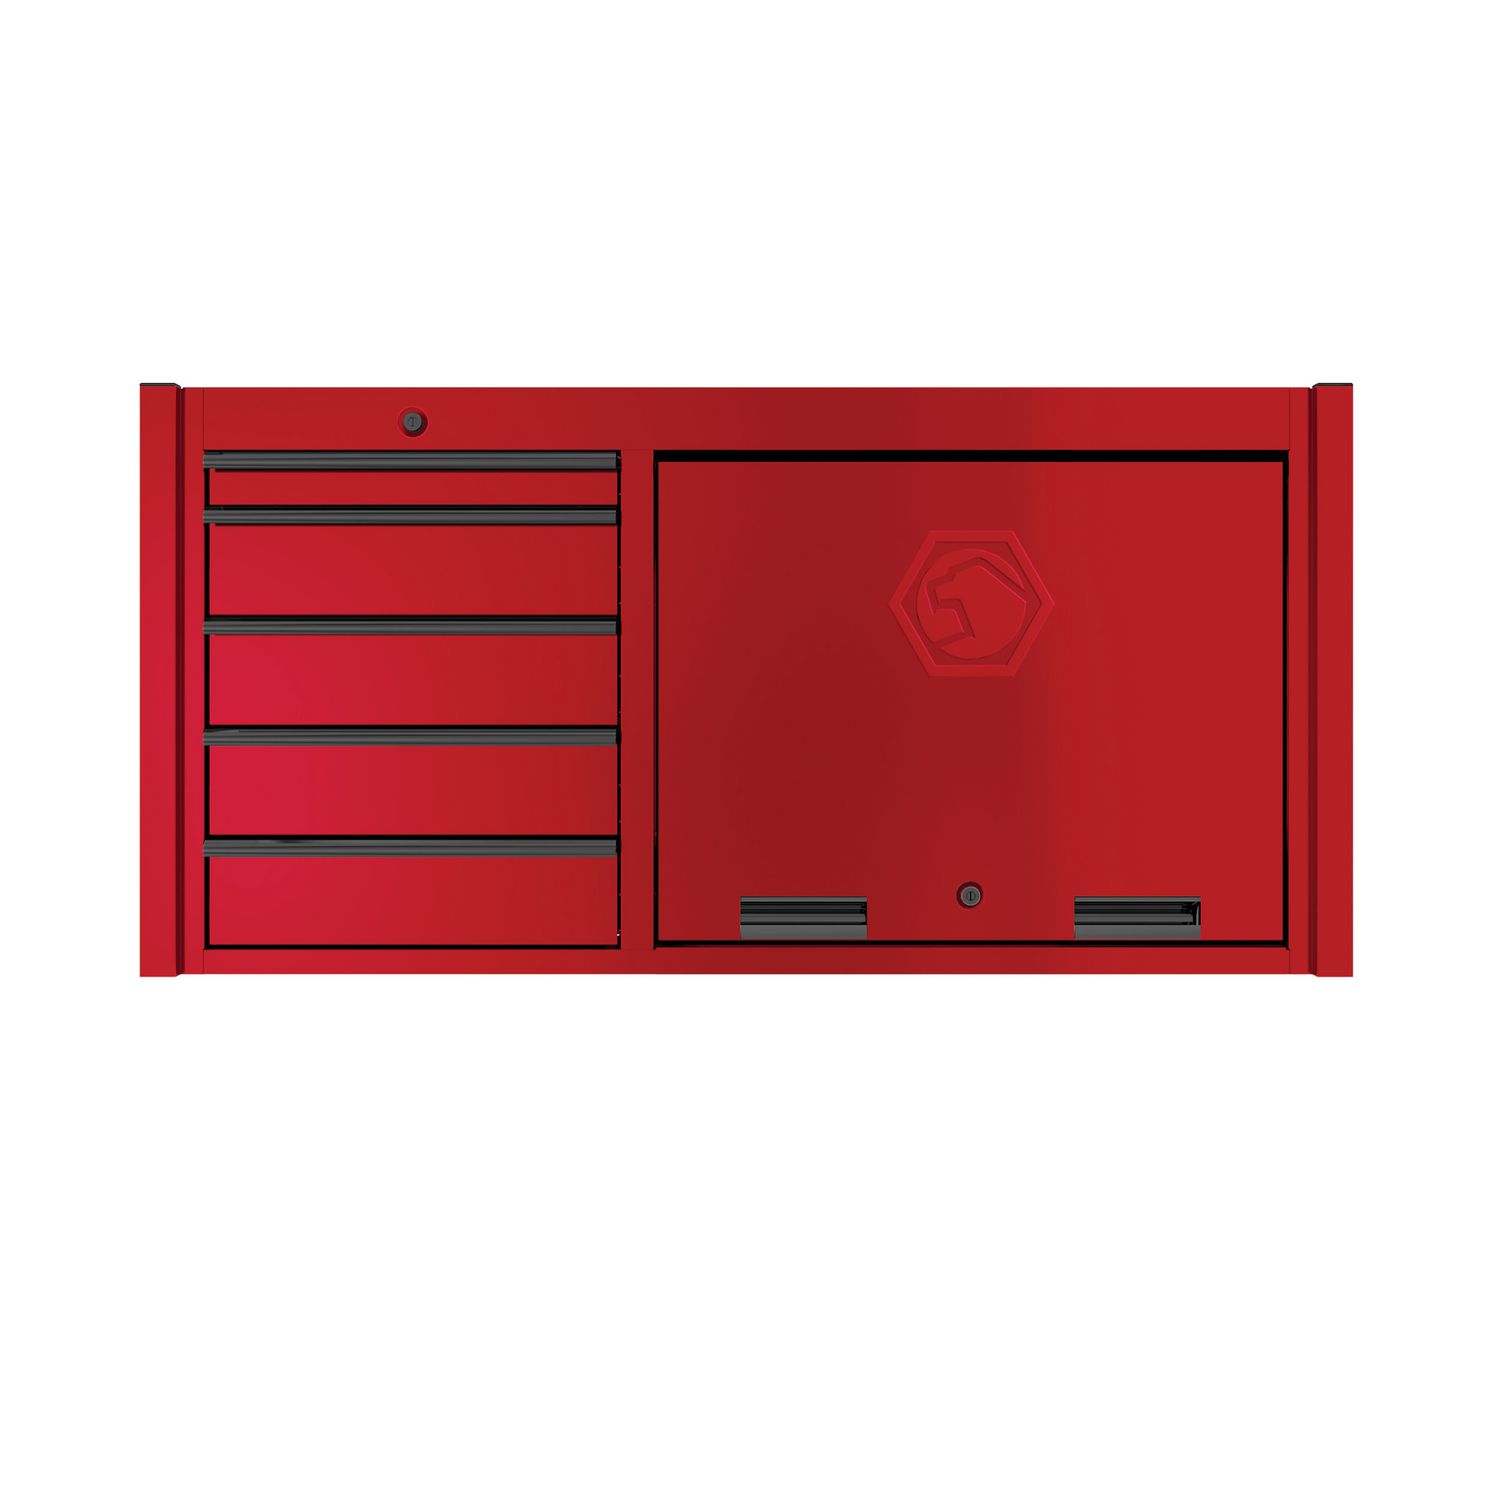 57 DOUBLE-BAY 28 DEEP 9-DRAWER 4S TB TOOLS FOR THE CAUSE TOOLBOX  4228TB-PINKRBN22